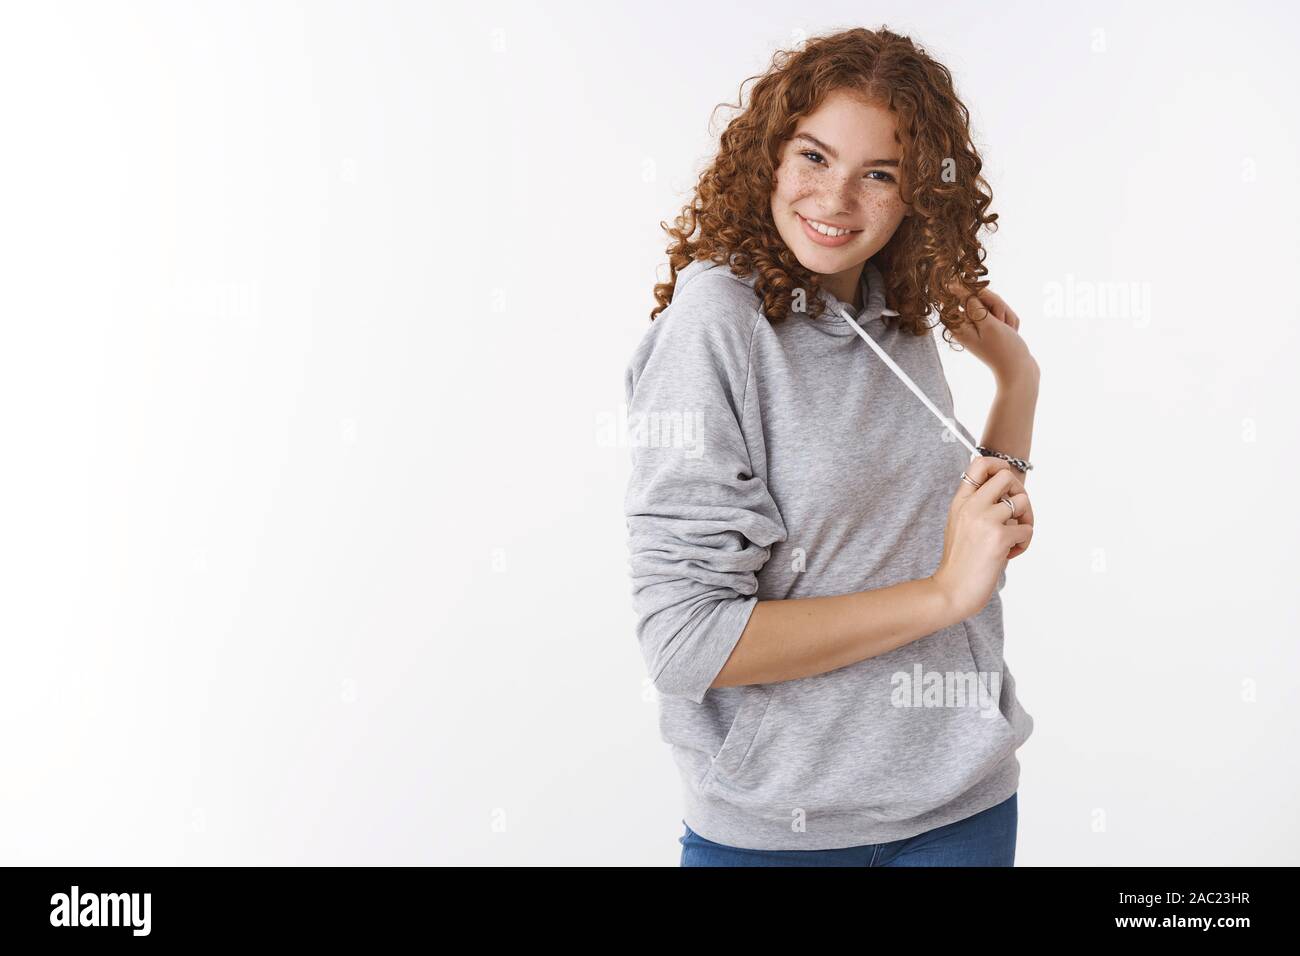 Studio shot cheeky cheerful redhead charismatic young girl wearing grey hoodie smiling silly flirting giggling playing hair wearing grey casual hoodie Stock Photo